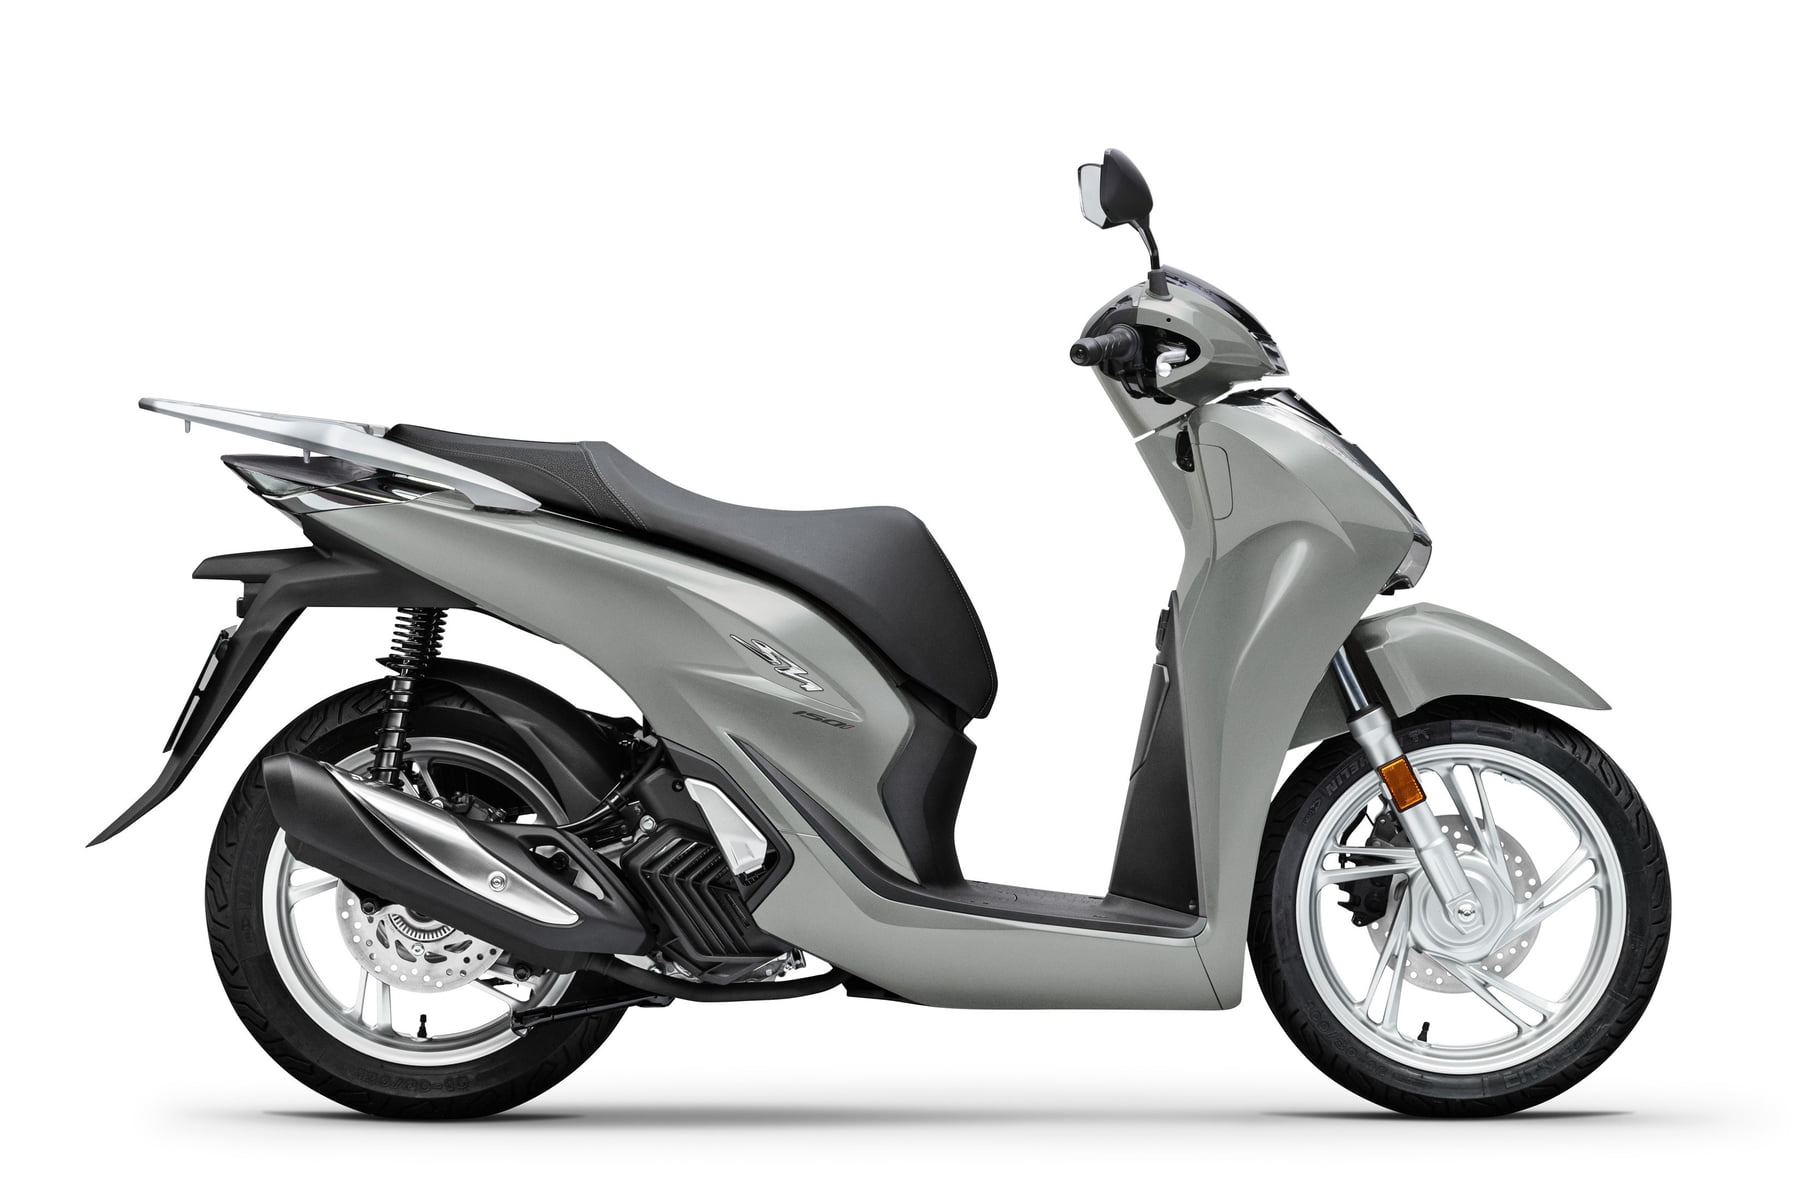 2023 Honda SH150i gets new colors in Europe 157cc premium city scooter